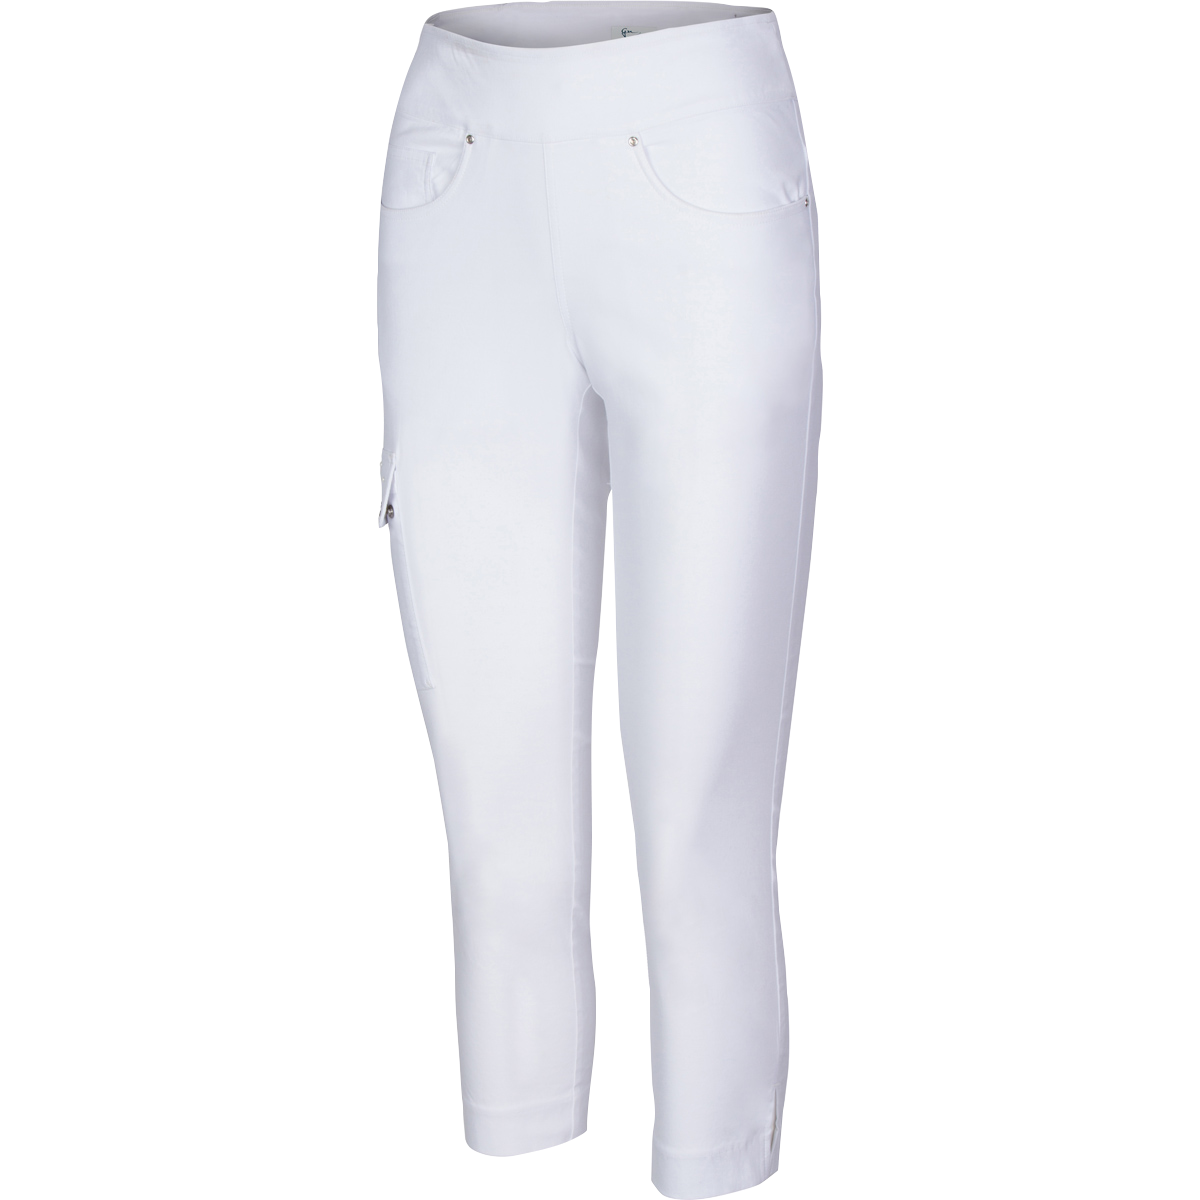 Image of Pearlette Pull-On 4-Way Stretch Crop Pant